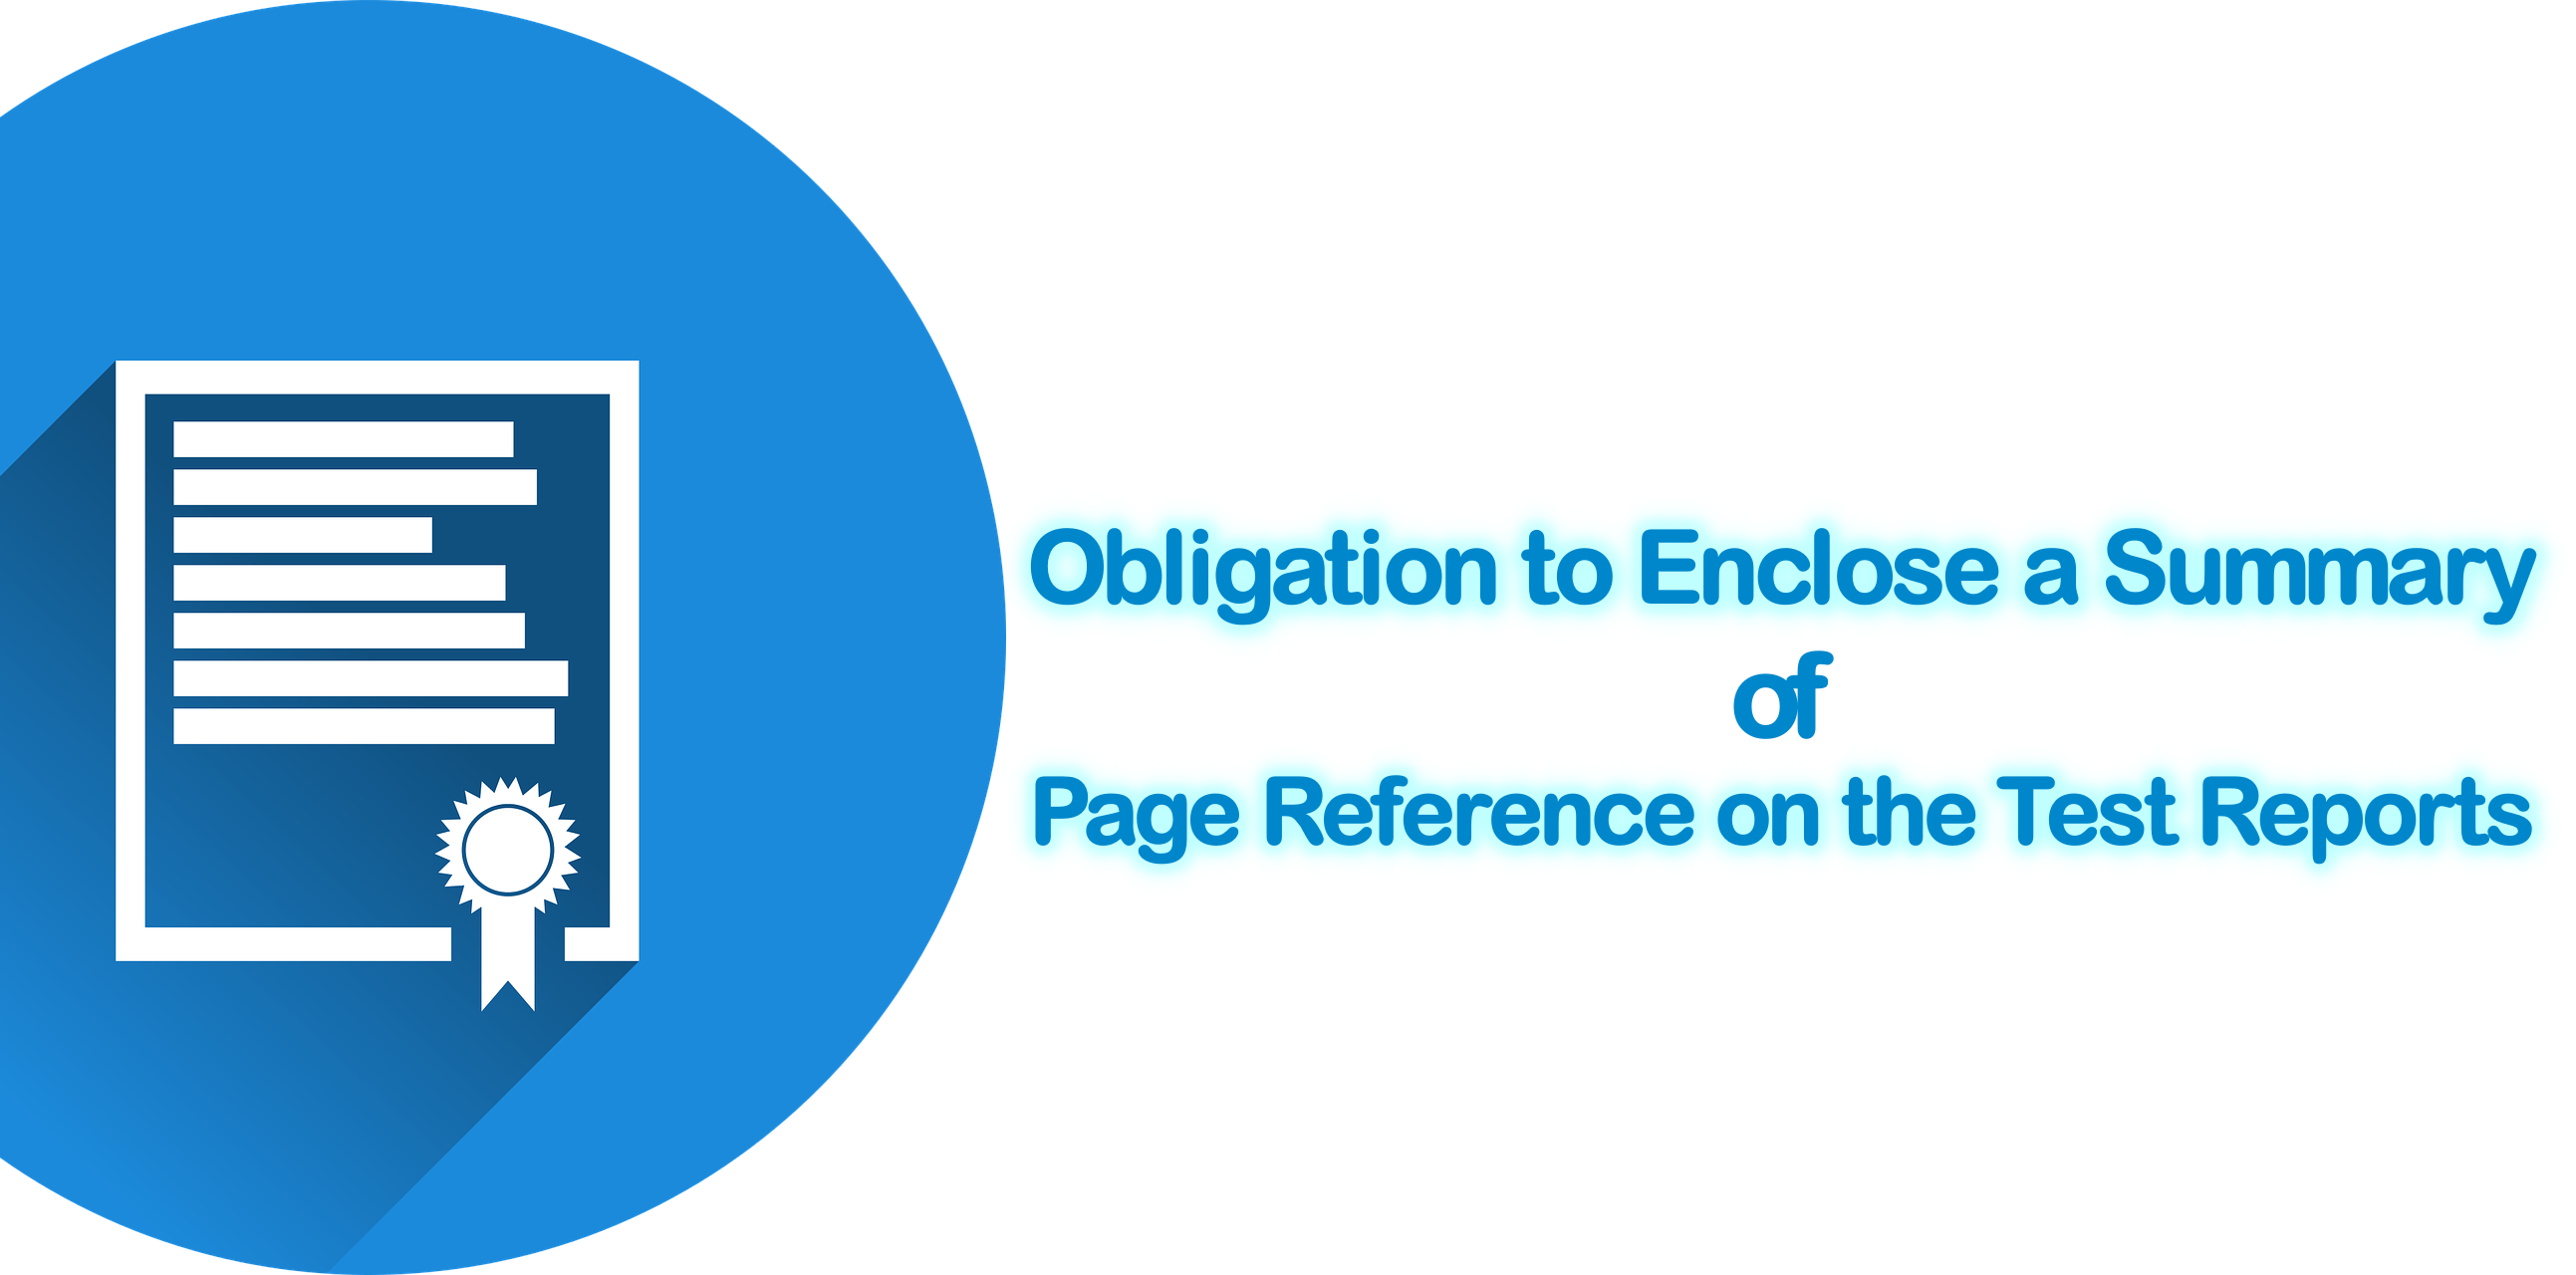 Obligation to Enclose Summary of Page Reference on the Test Reports